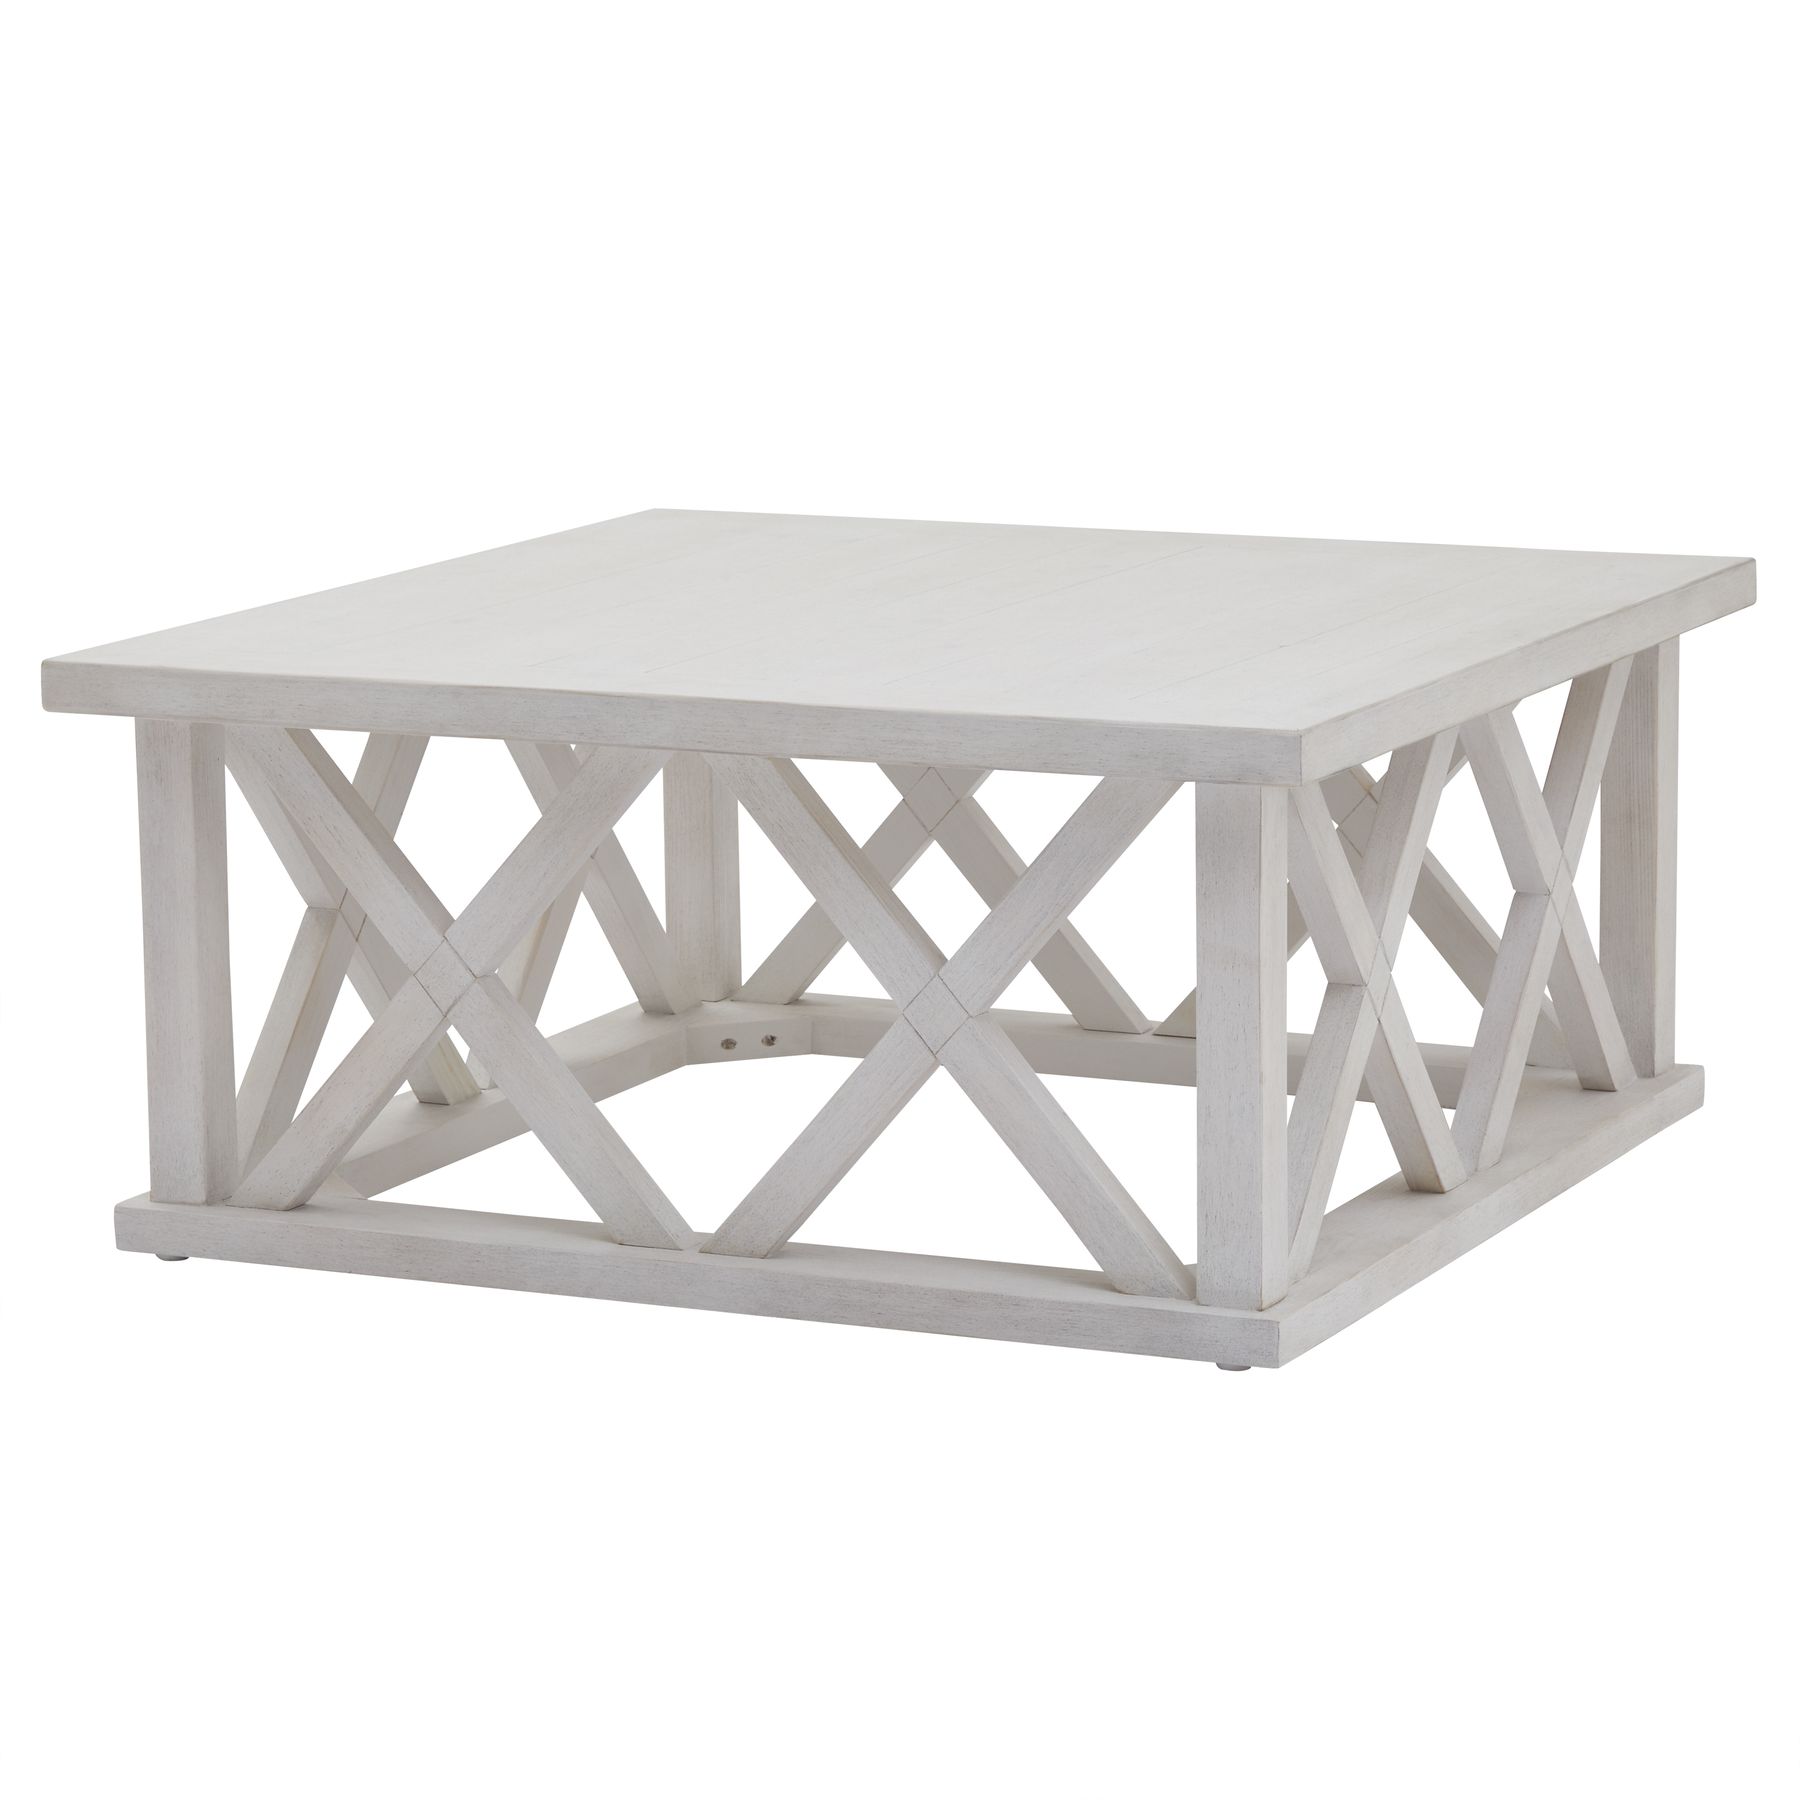 Stamford Plank Collection Square Coffee Table - Image 1